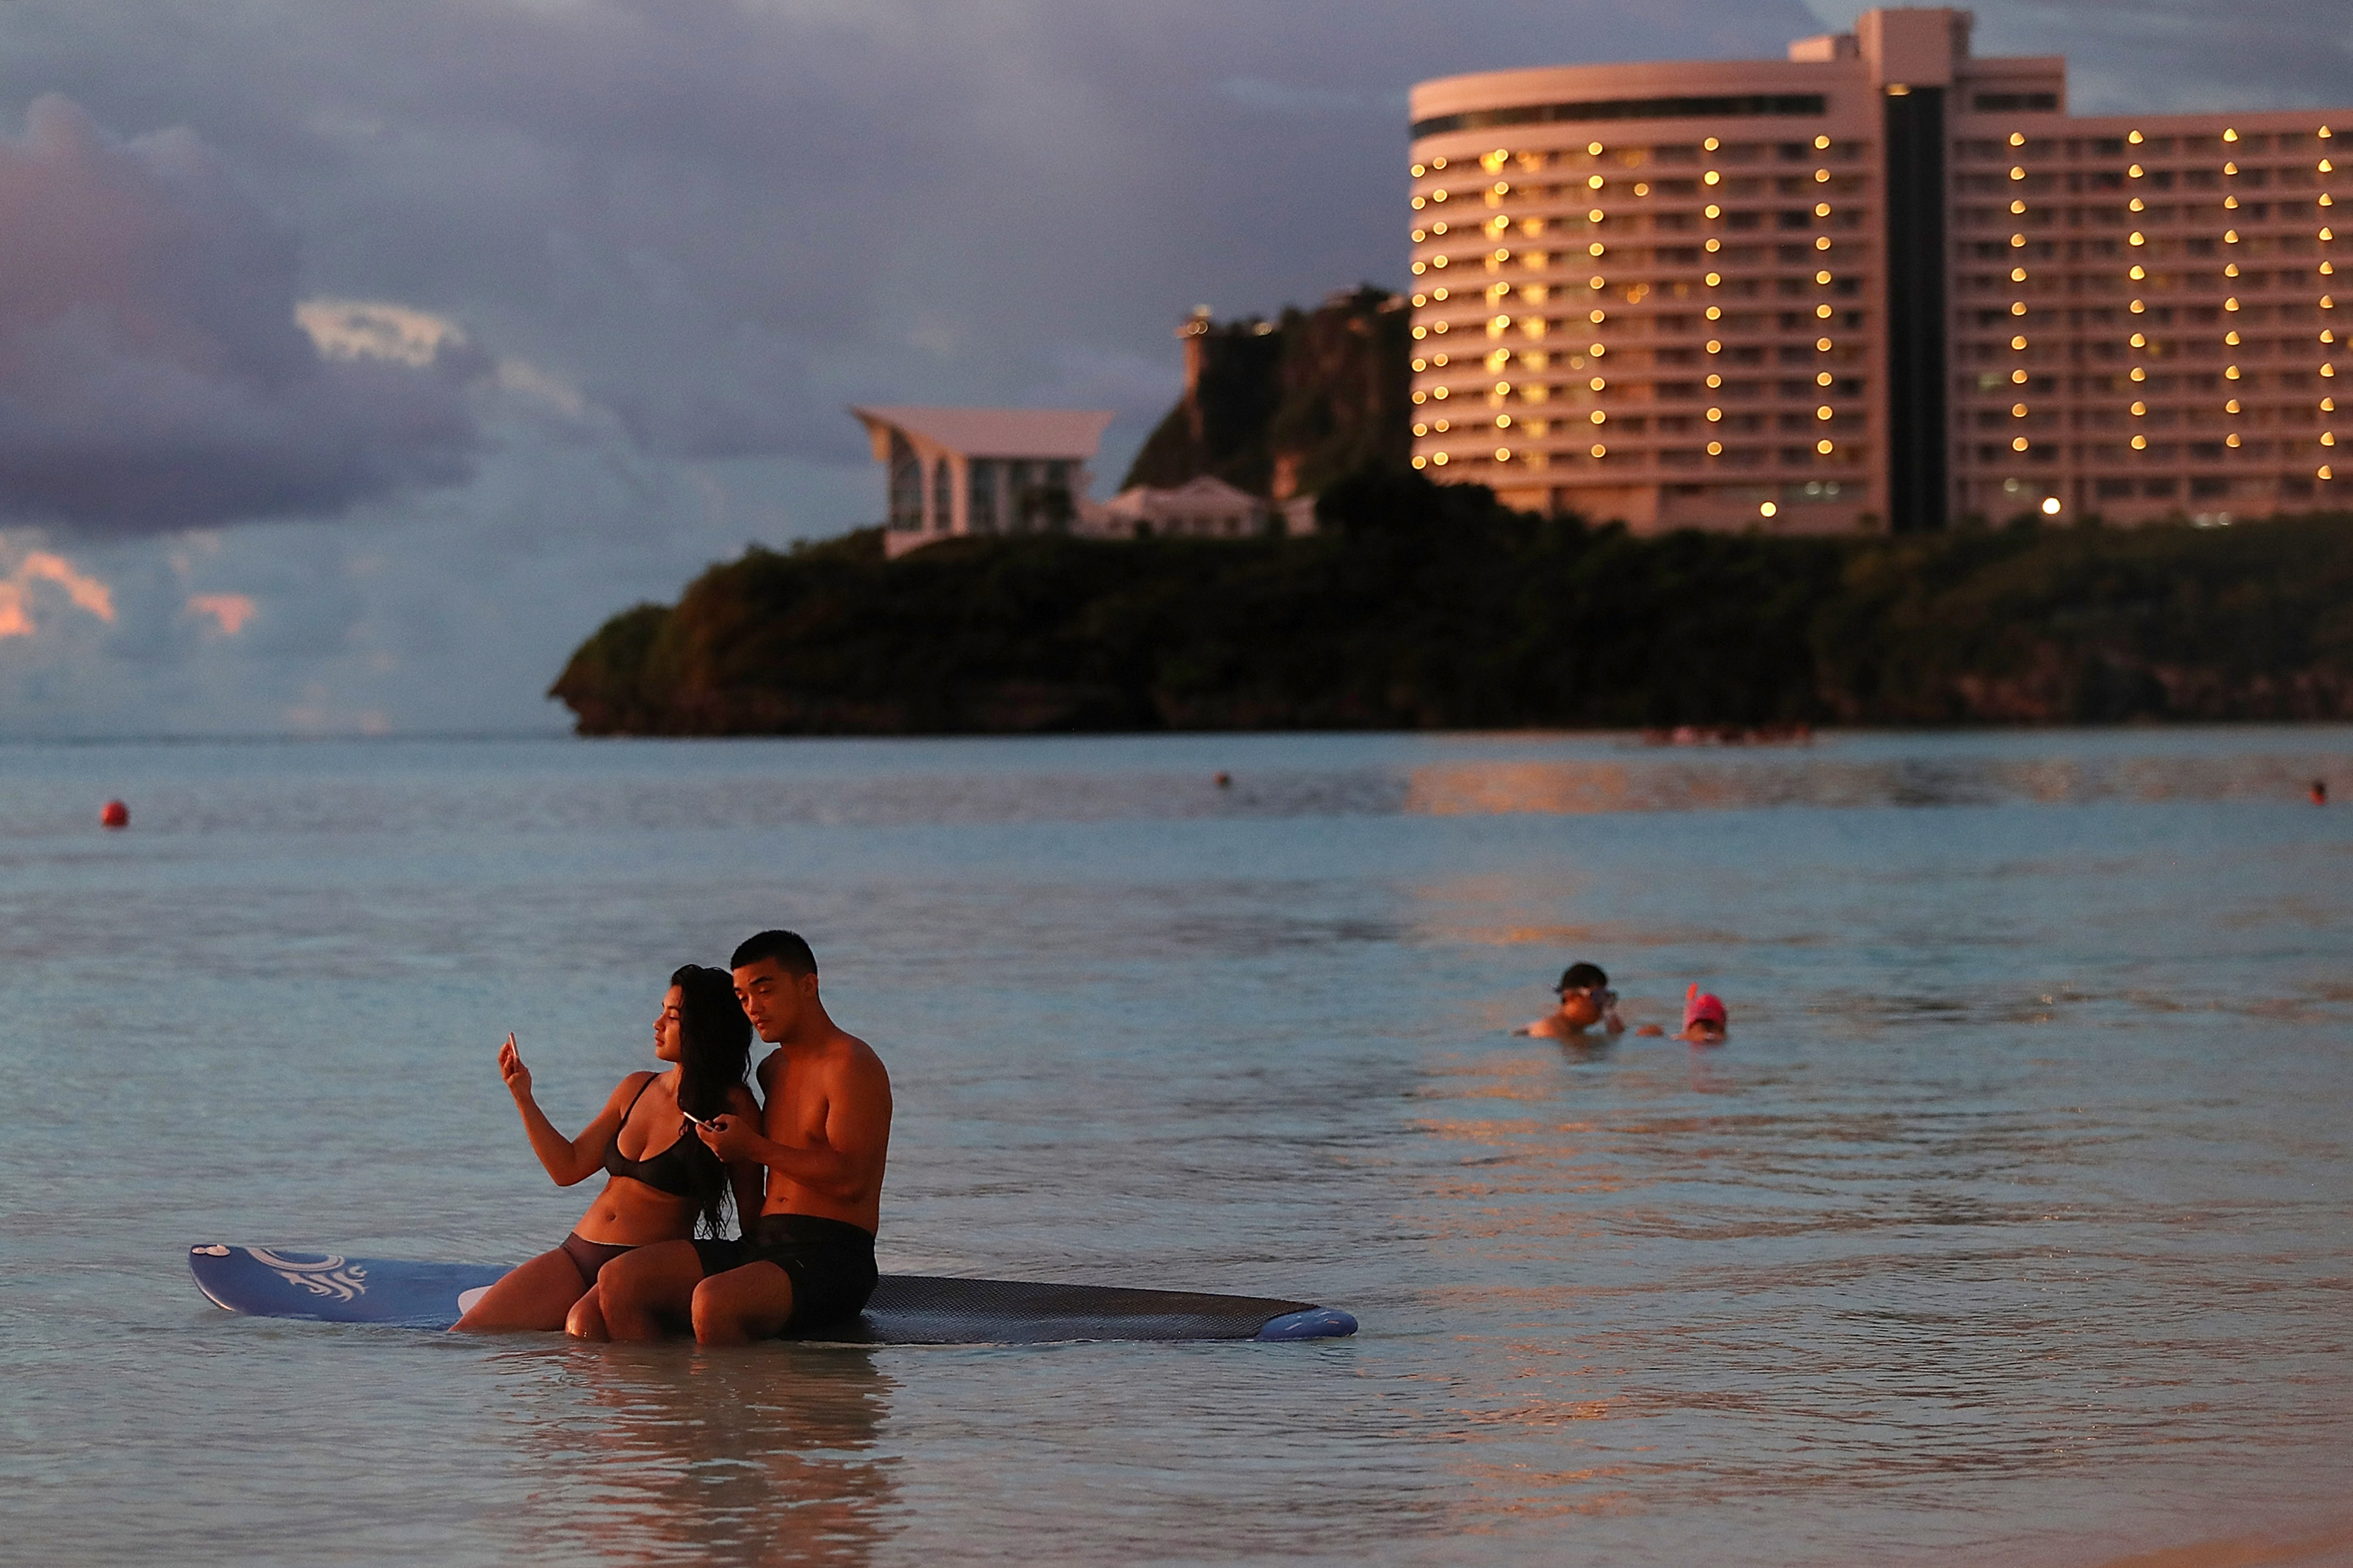 A couple sits on a paddle board at Tumon Bay on August 16, 2017 in Tamuning, Guam. The American territory remains on high alert as a showdown between the U.S. and North Korea continues. (Justin Sullivan—Getty Images)